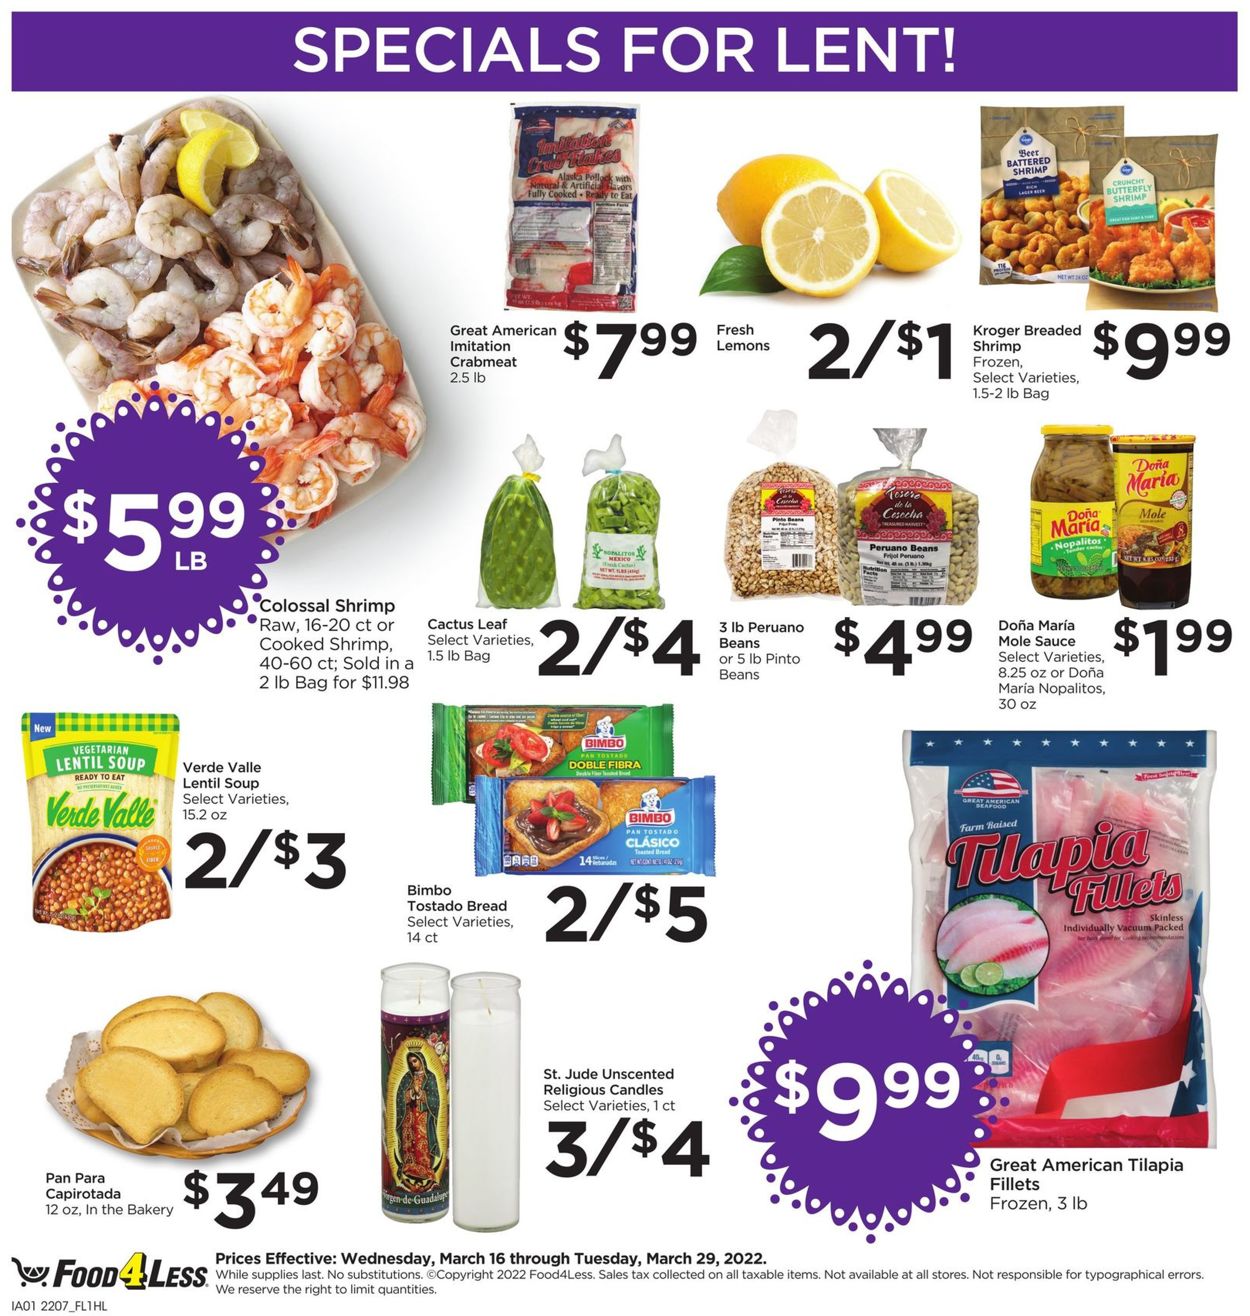 Food 4 Less Ad from 03/16/2022